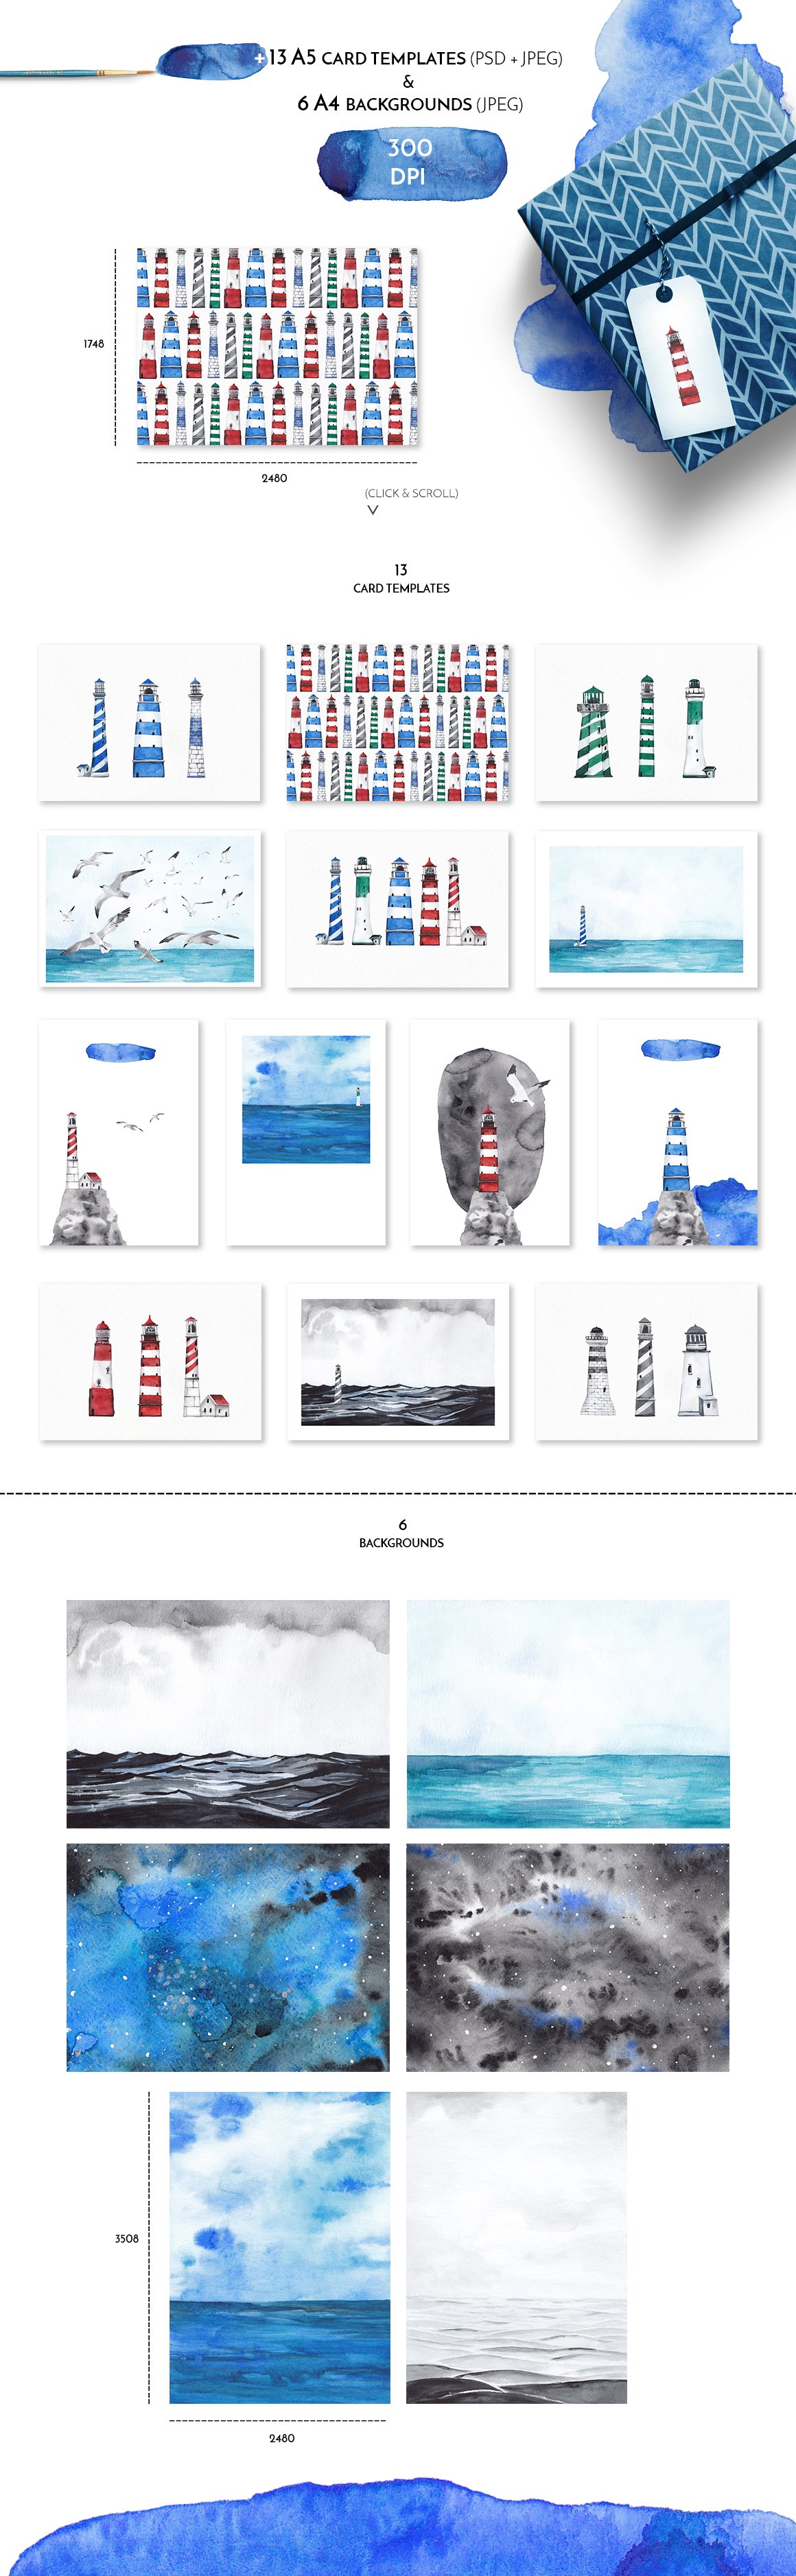 Great images with lighthouse elements.